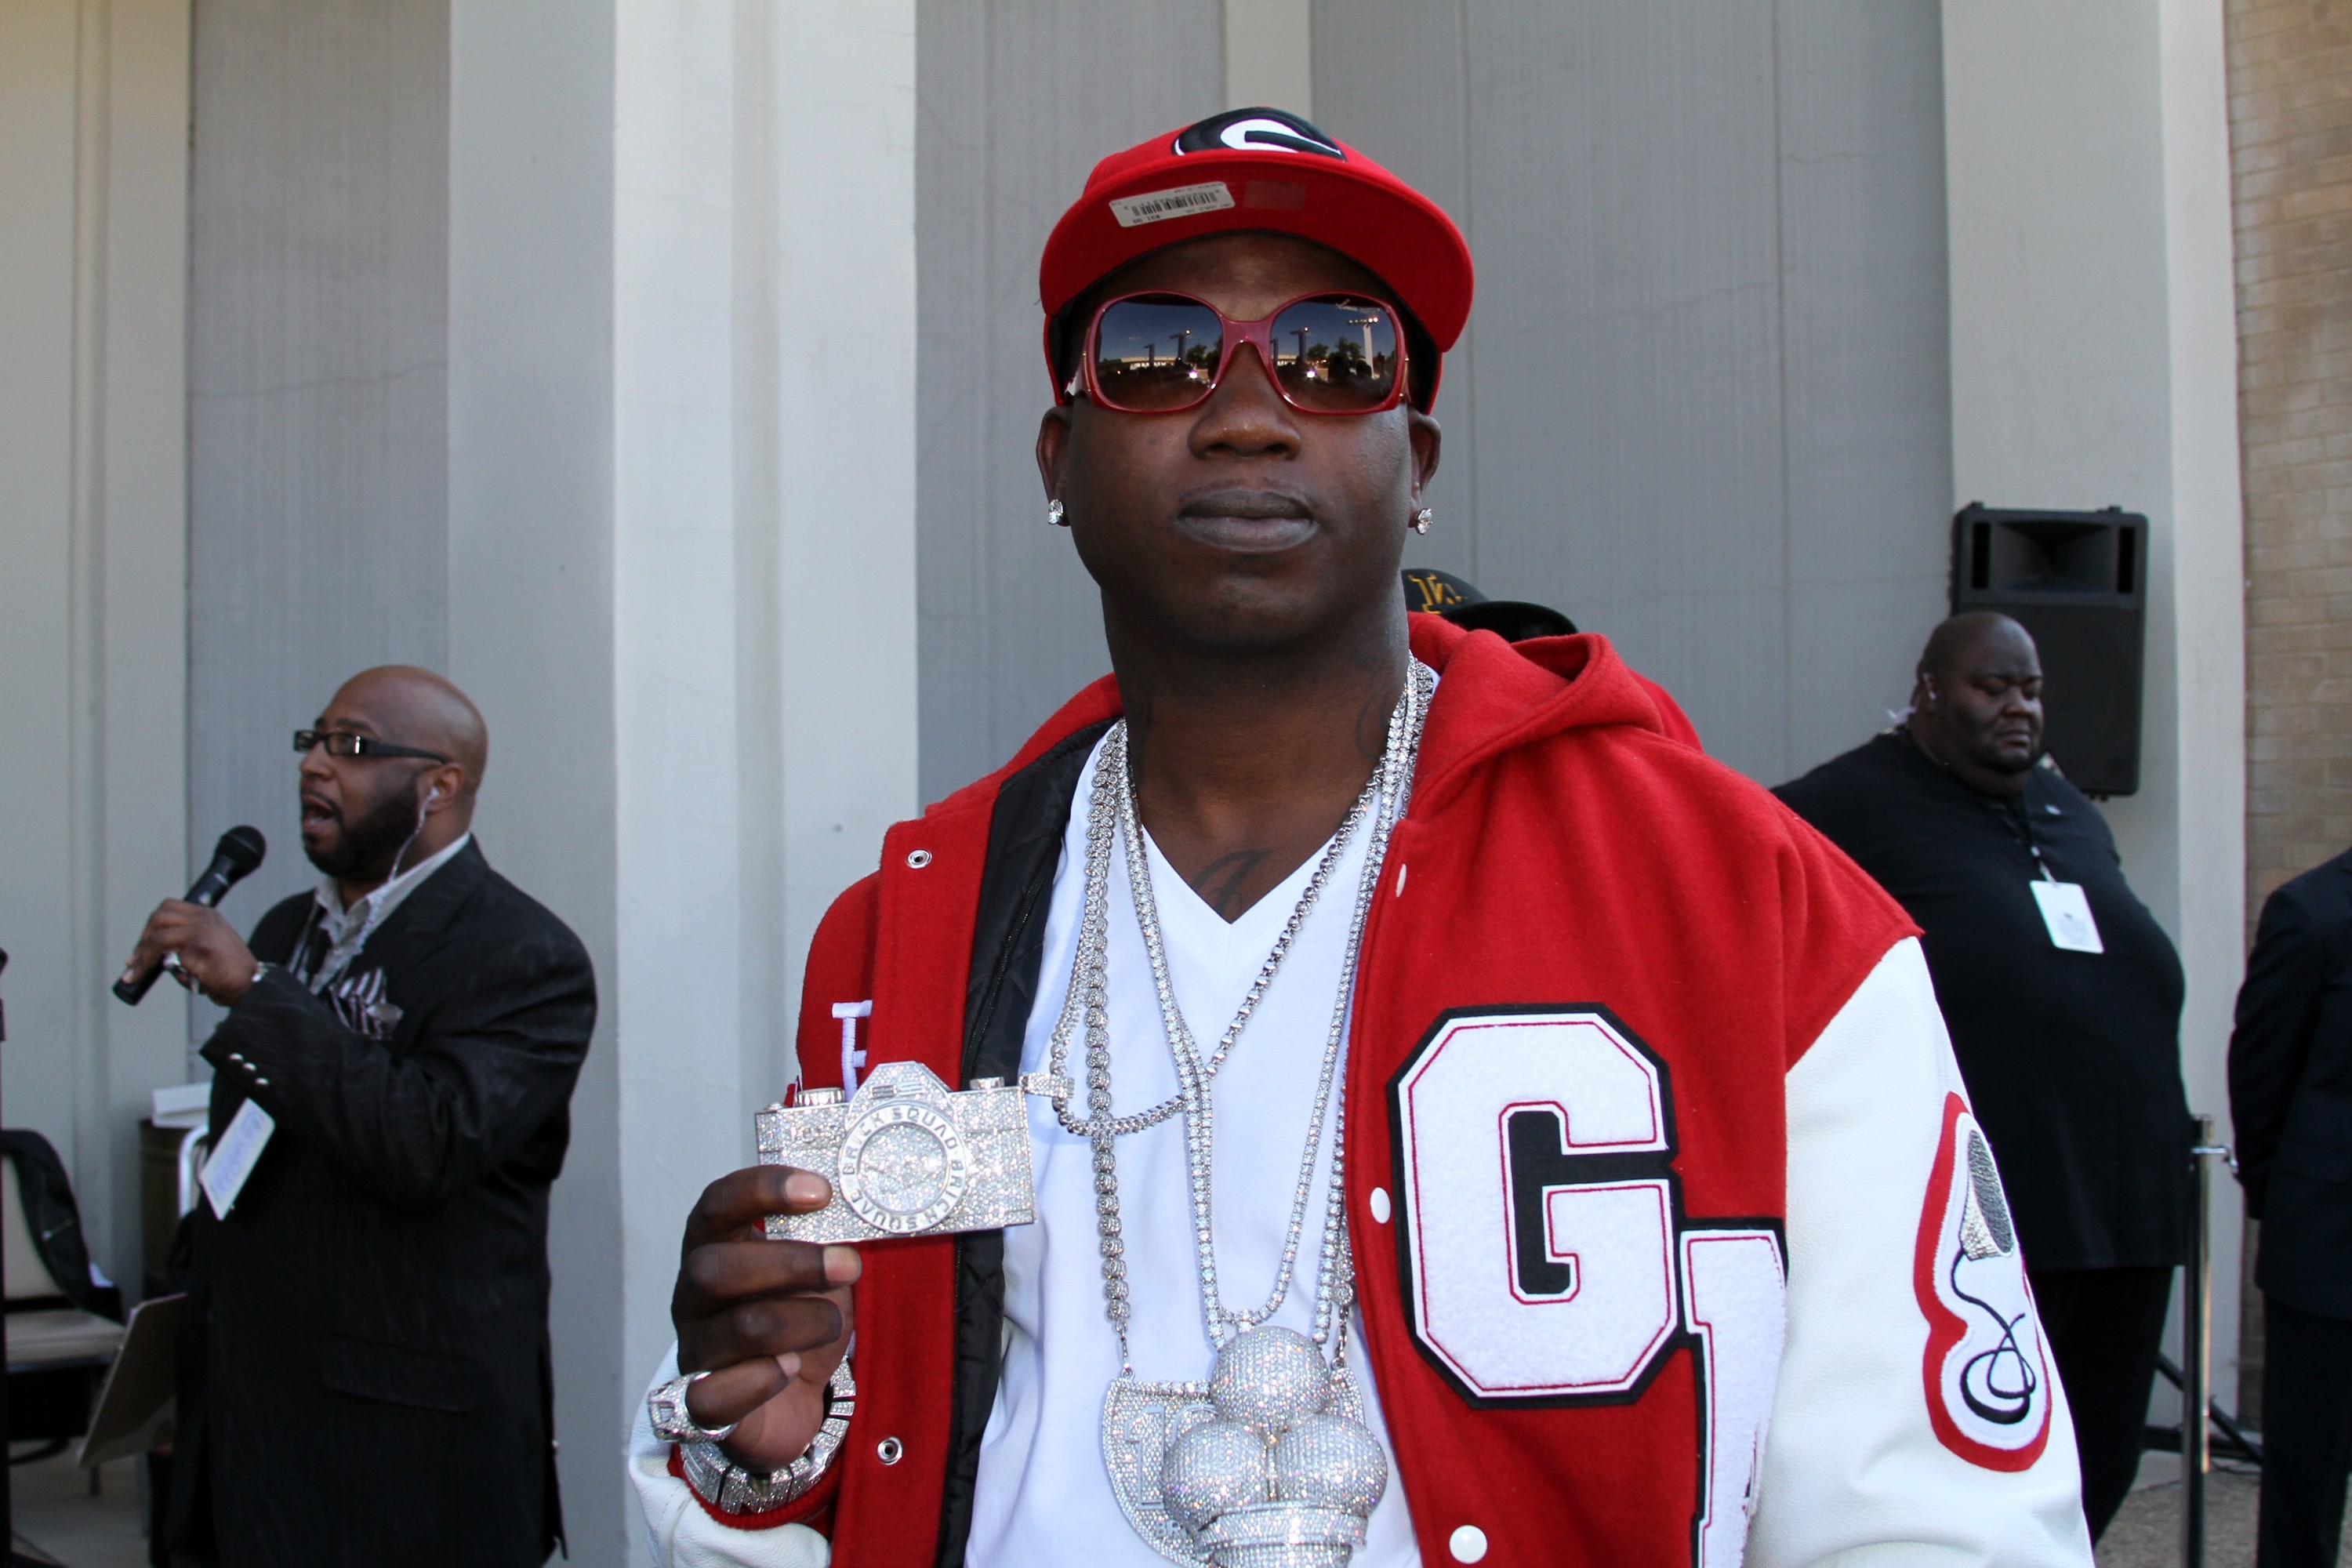 Gucci Mane Wallpapers (74+ pictures)